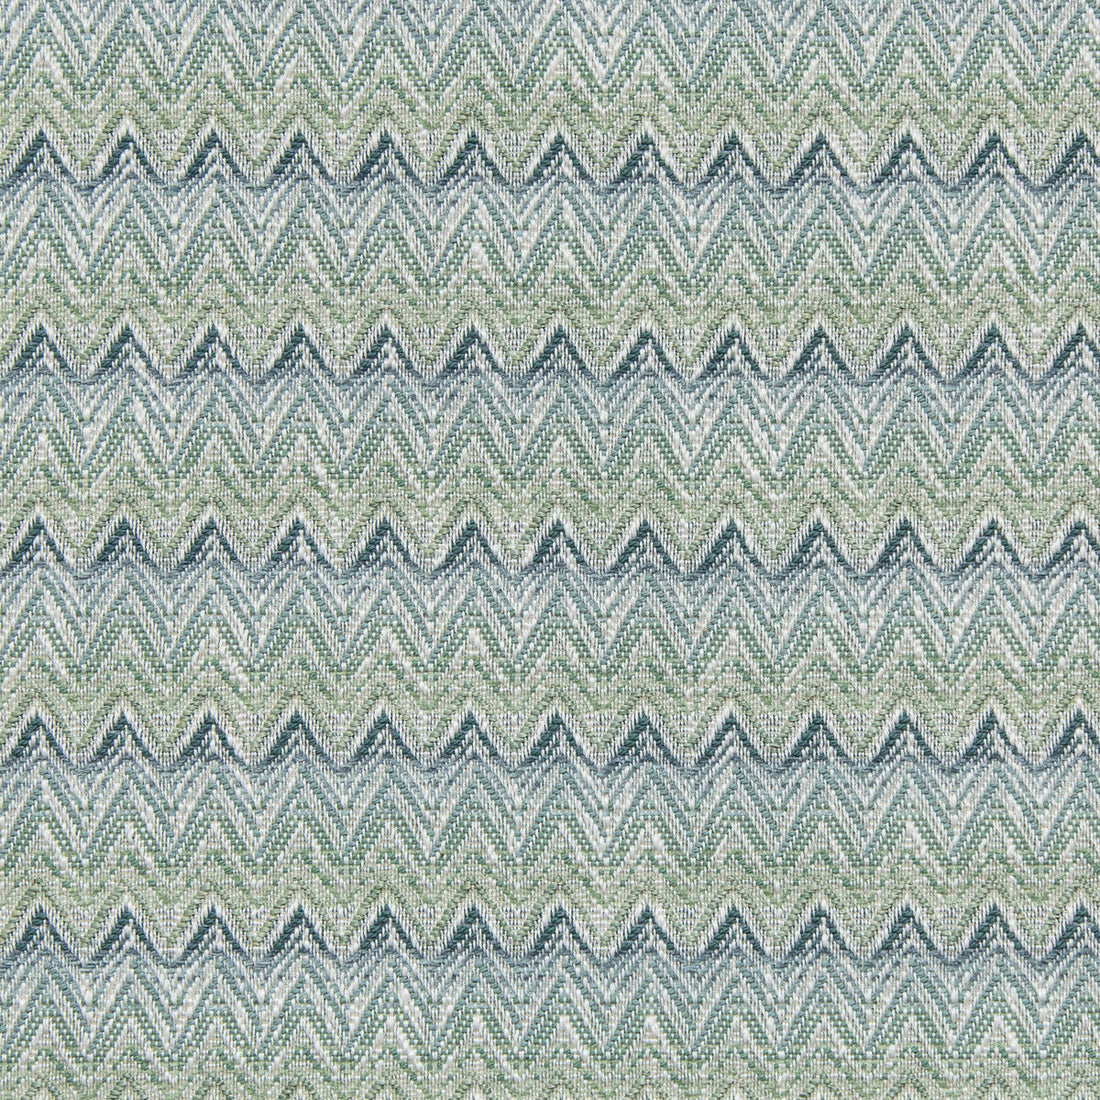 Cambrose Weave fabric in mineral color - pattern 2014191.13.0 - by Lee Jofa in the Linford Weaves collection